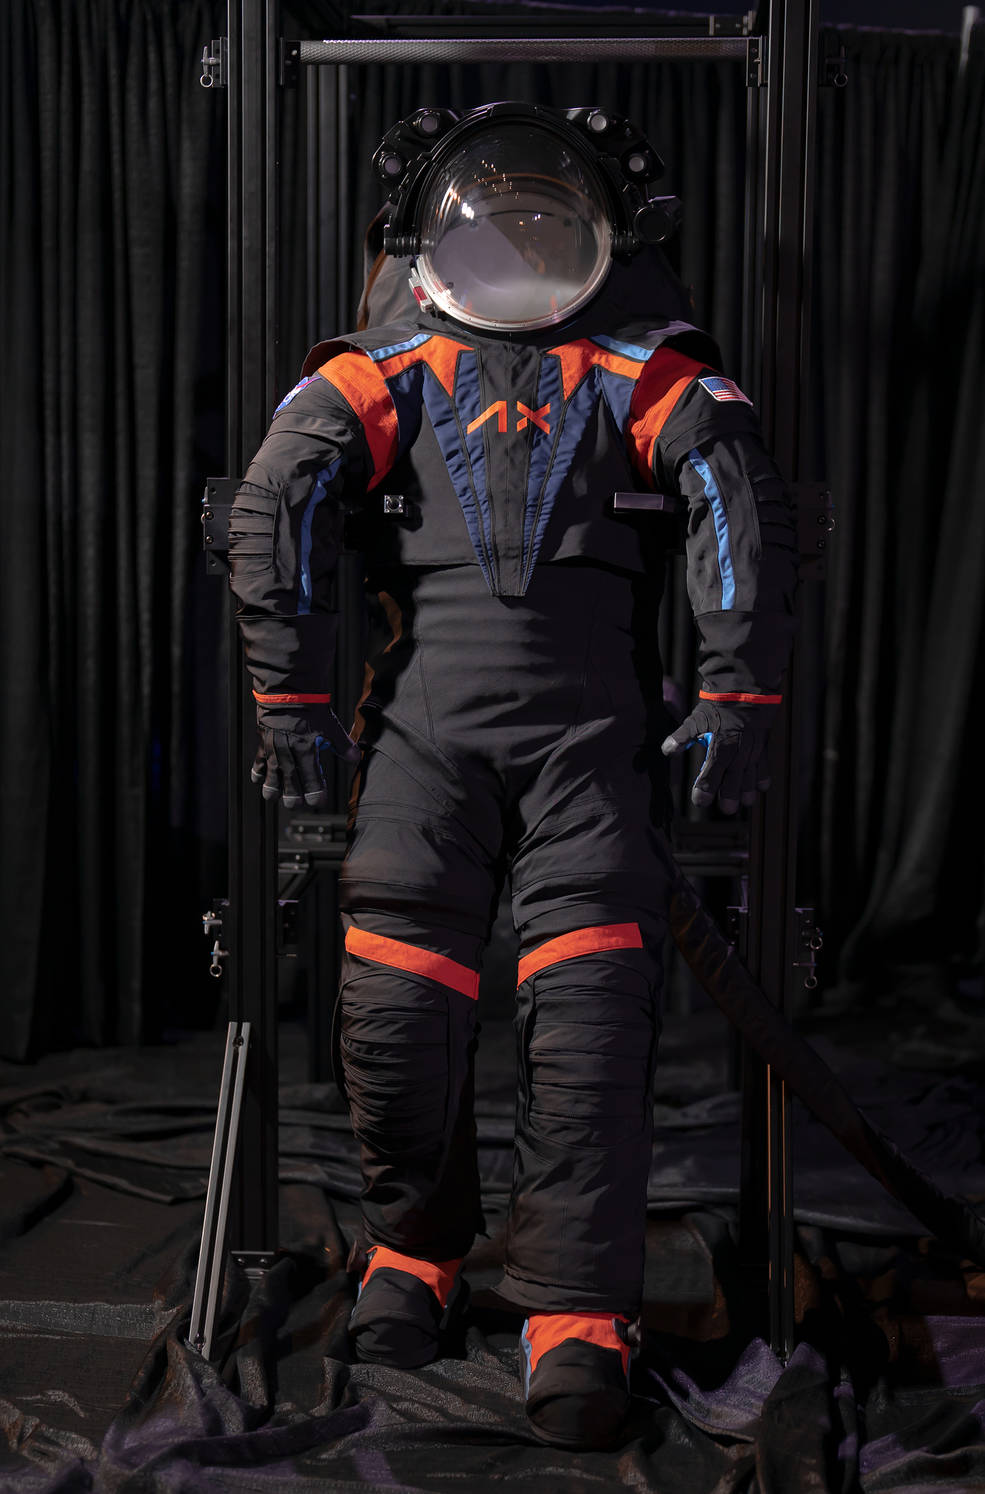 The Artemis III spacesuit prototype, the AxEMU. Though this prototype uses a dark gray cover material, the final version will likely be all-white when worn by NASA astronauts on the Moon’s surface. Credit: Axiom Space 